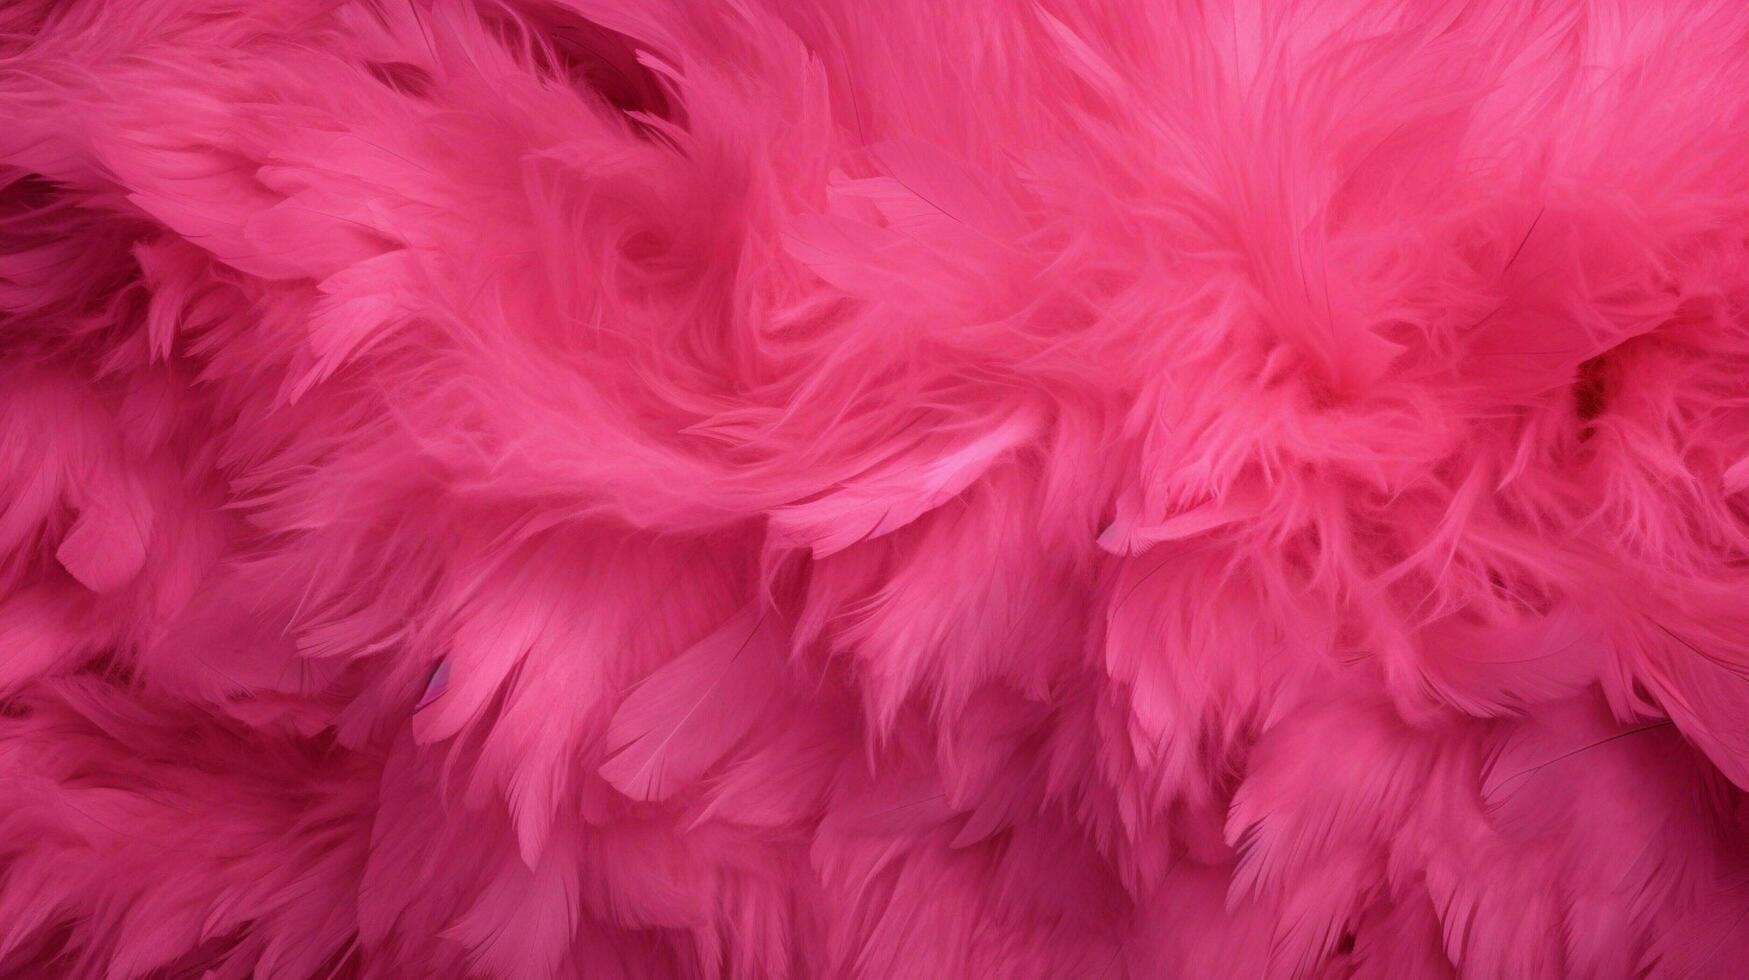 Hot Pink Texture High Quality Free Photo